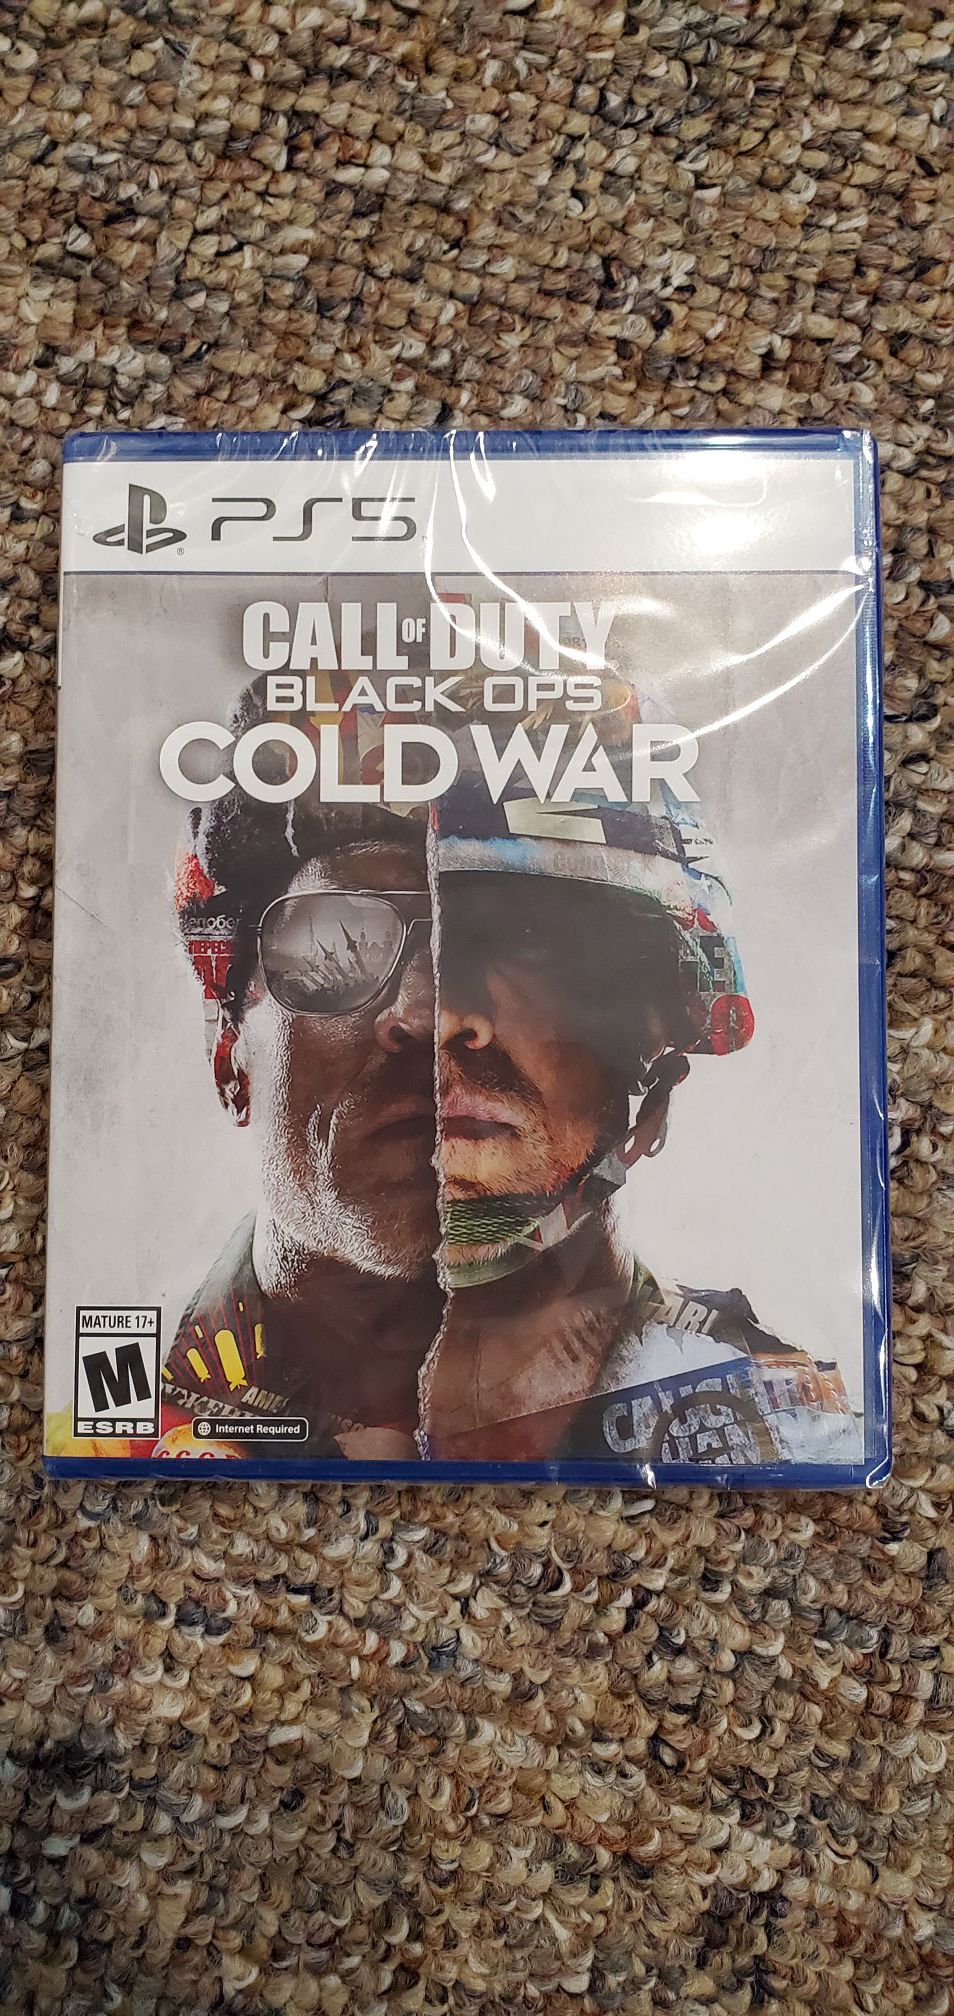 Call of duty black ops cold war ps5 brand new unopened